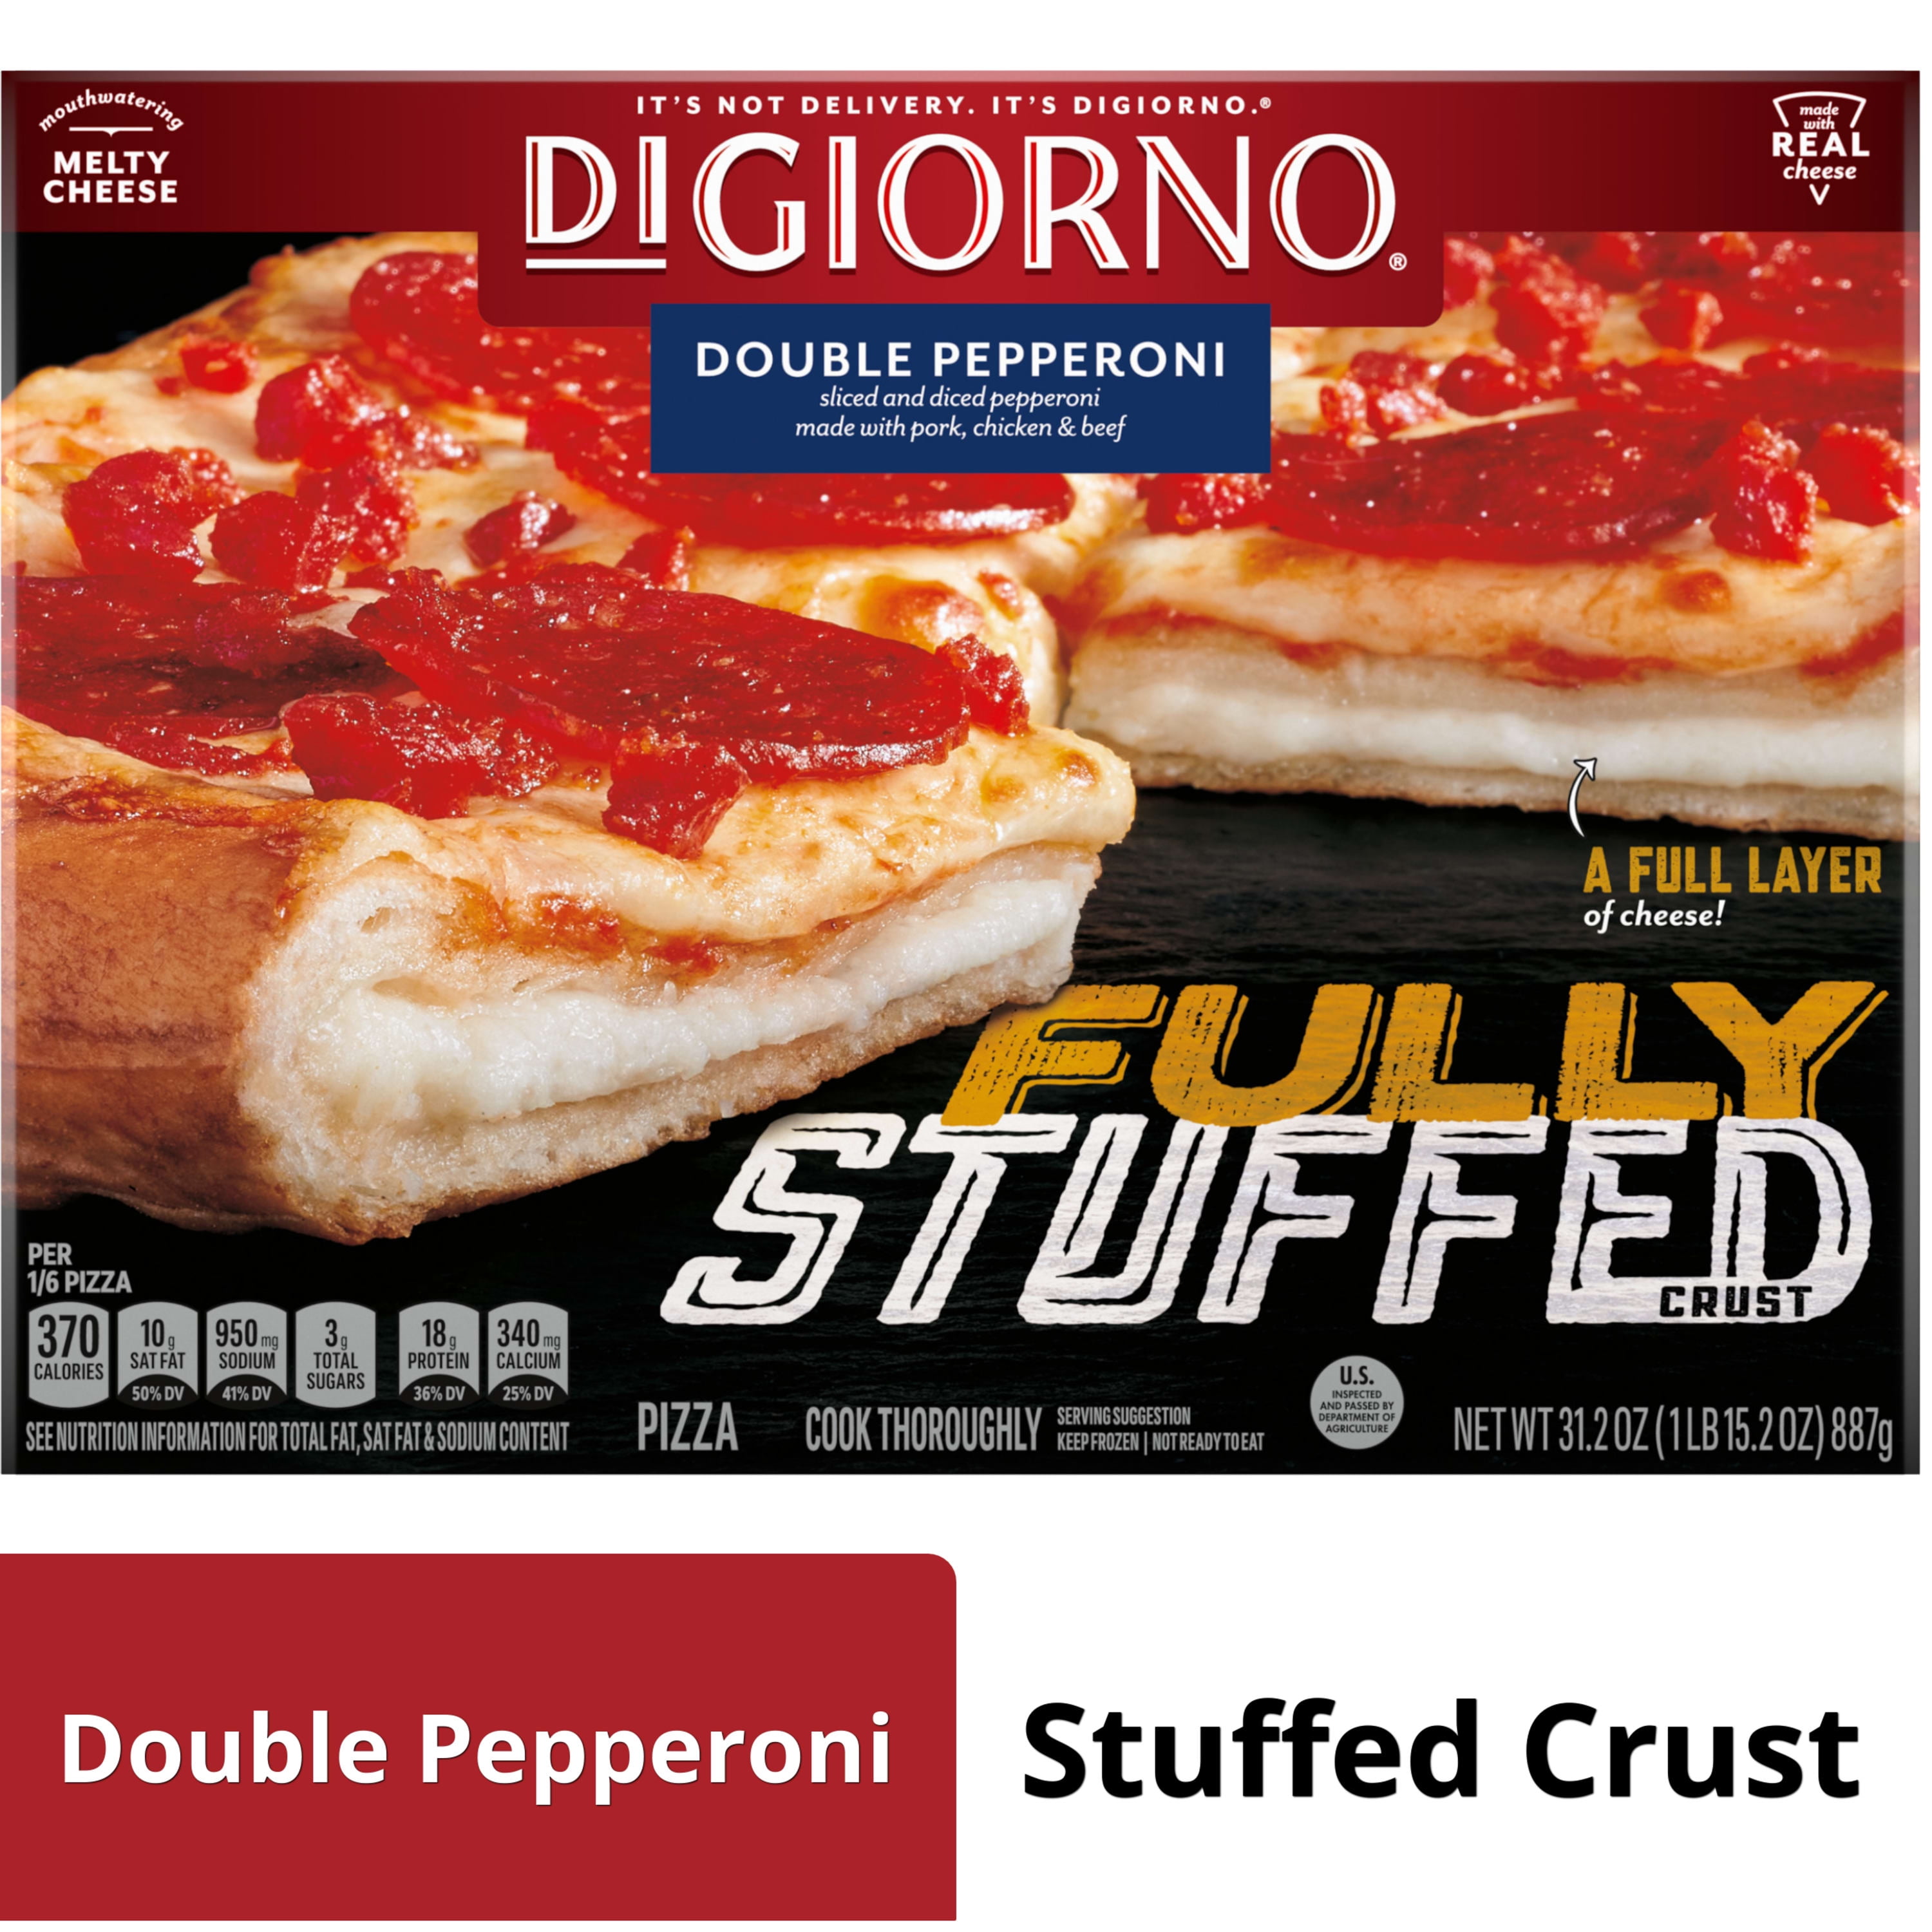 Adventures in all things food: Big Game TD with DiGiorno Pepperoni Stuffed  Crust® Pizza & Ritz Crackers